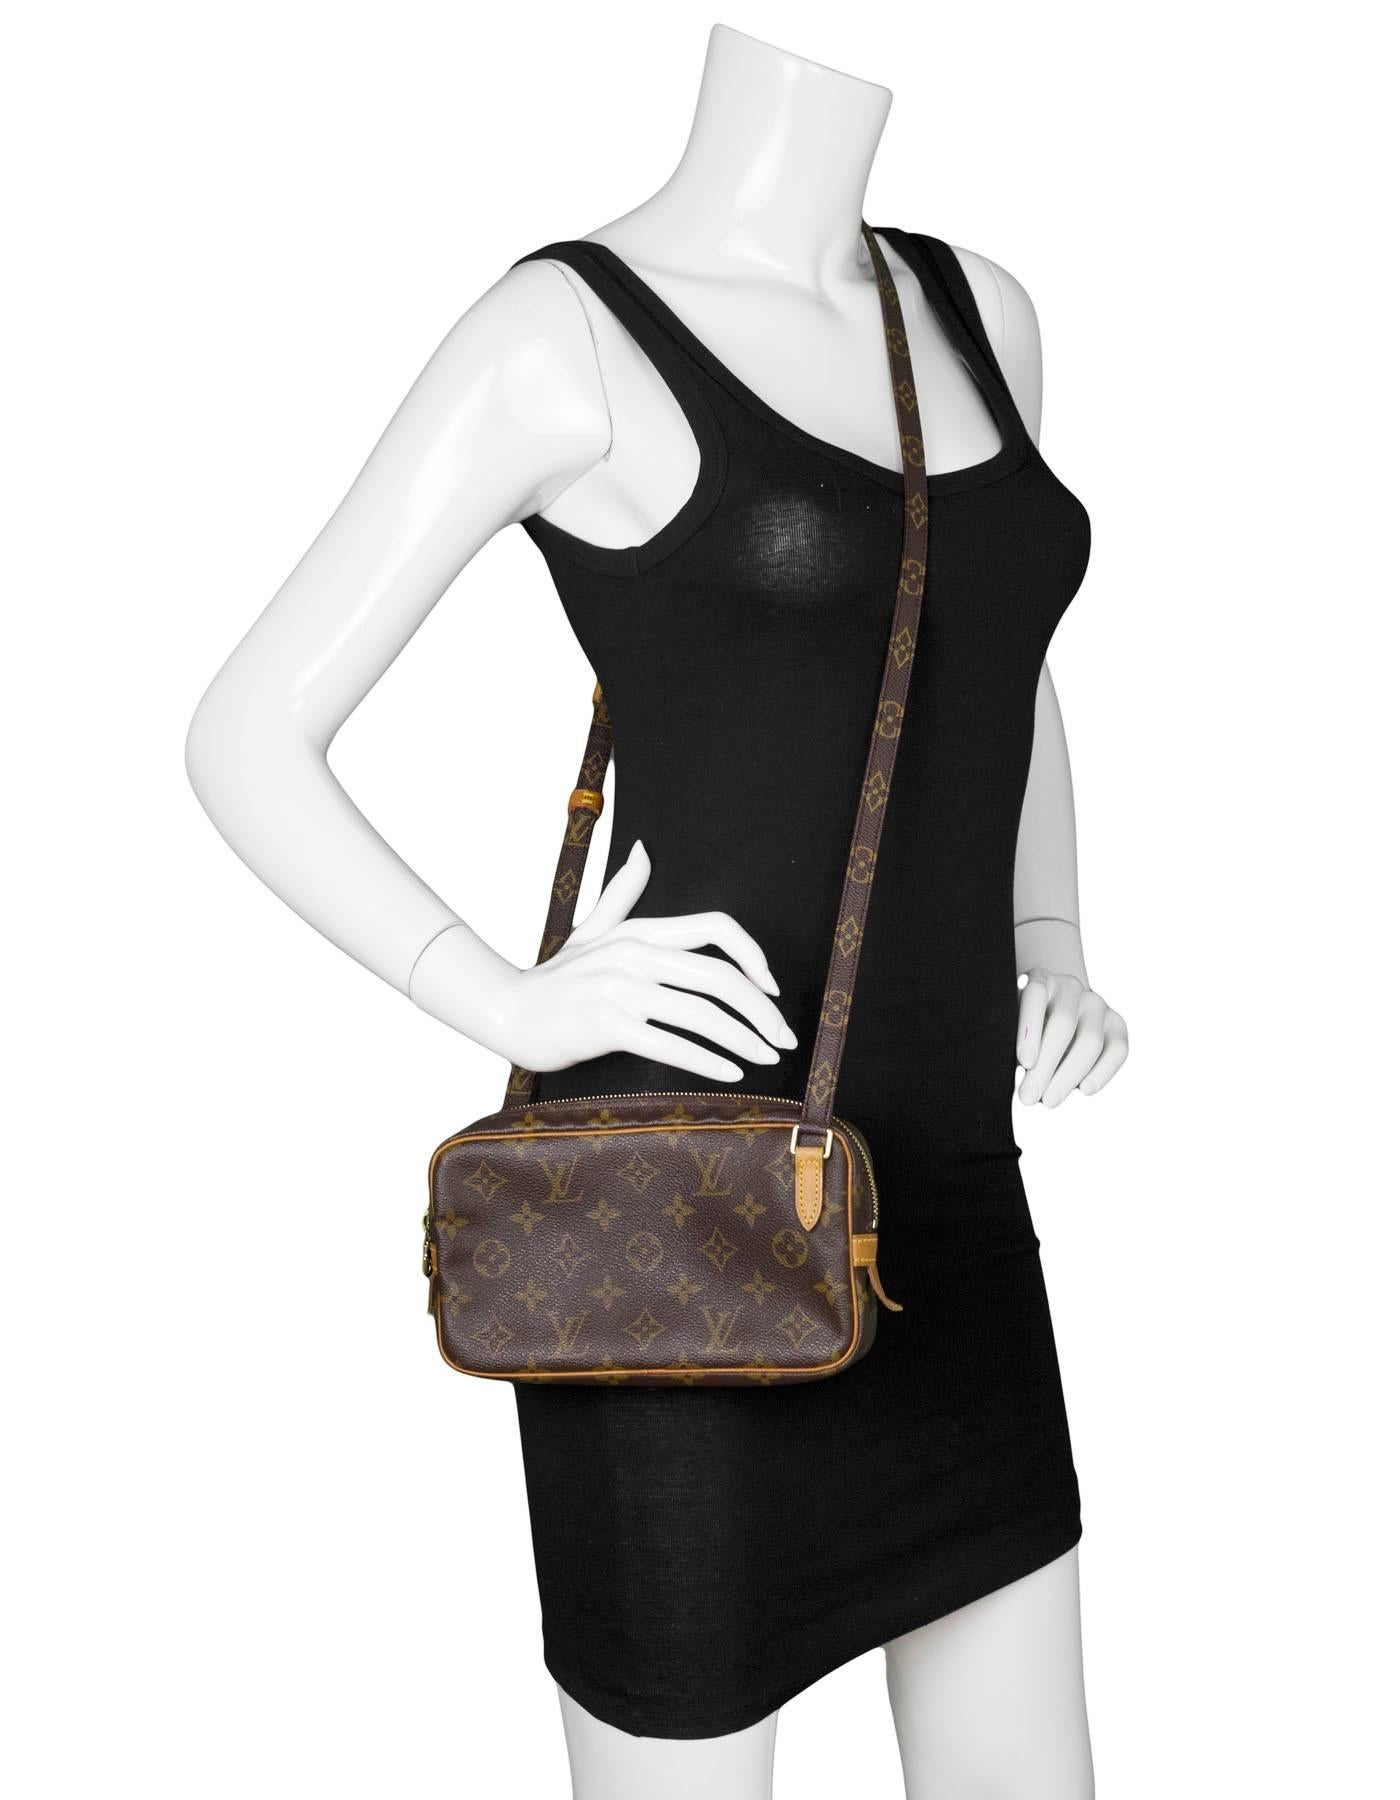 Louis Vuitton Monogram Marly Bandouliere Crossbody Bag

Made In: France
Year of Production: 2000
Color: Brown
Hardware: Goldtone
Materials: Coated canvas and vachetta leather
Lining: Brown coated canvas
Closure/Opening: Zip top closure
Exterior